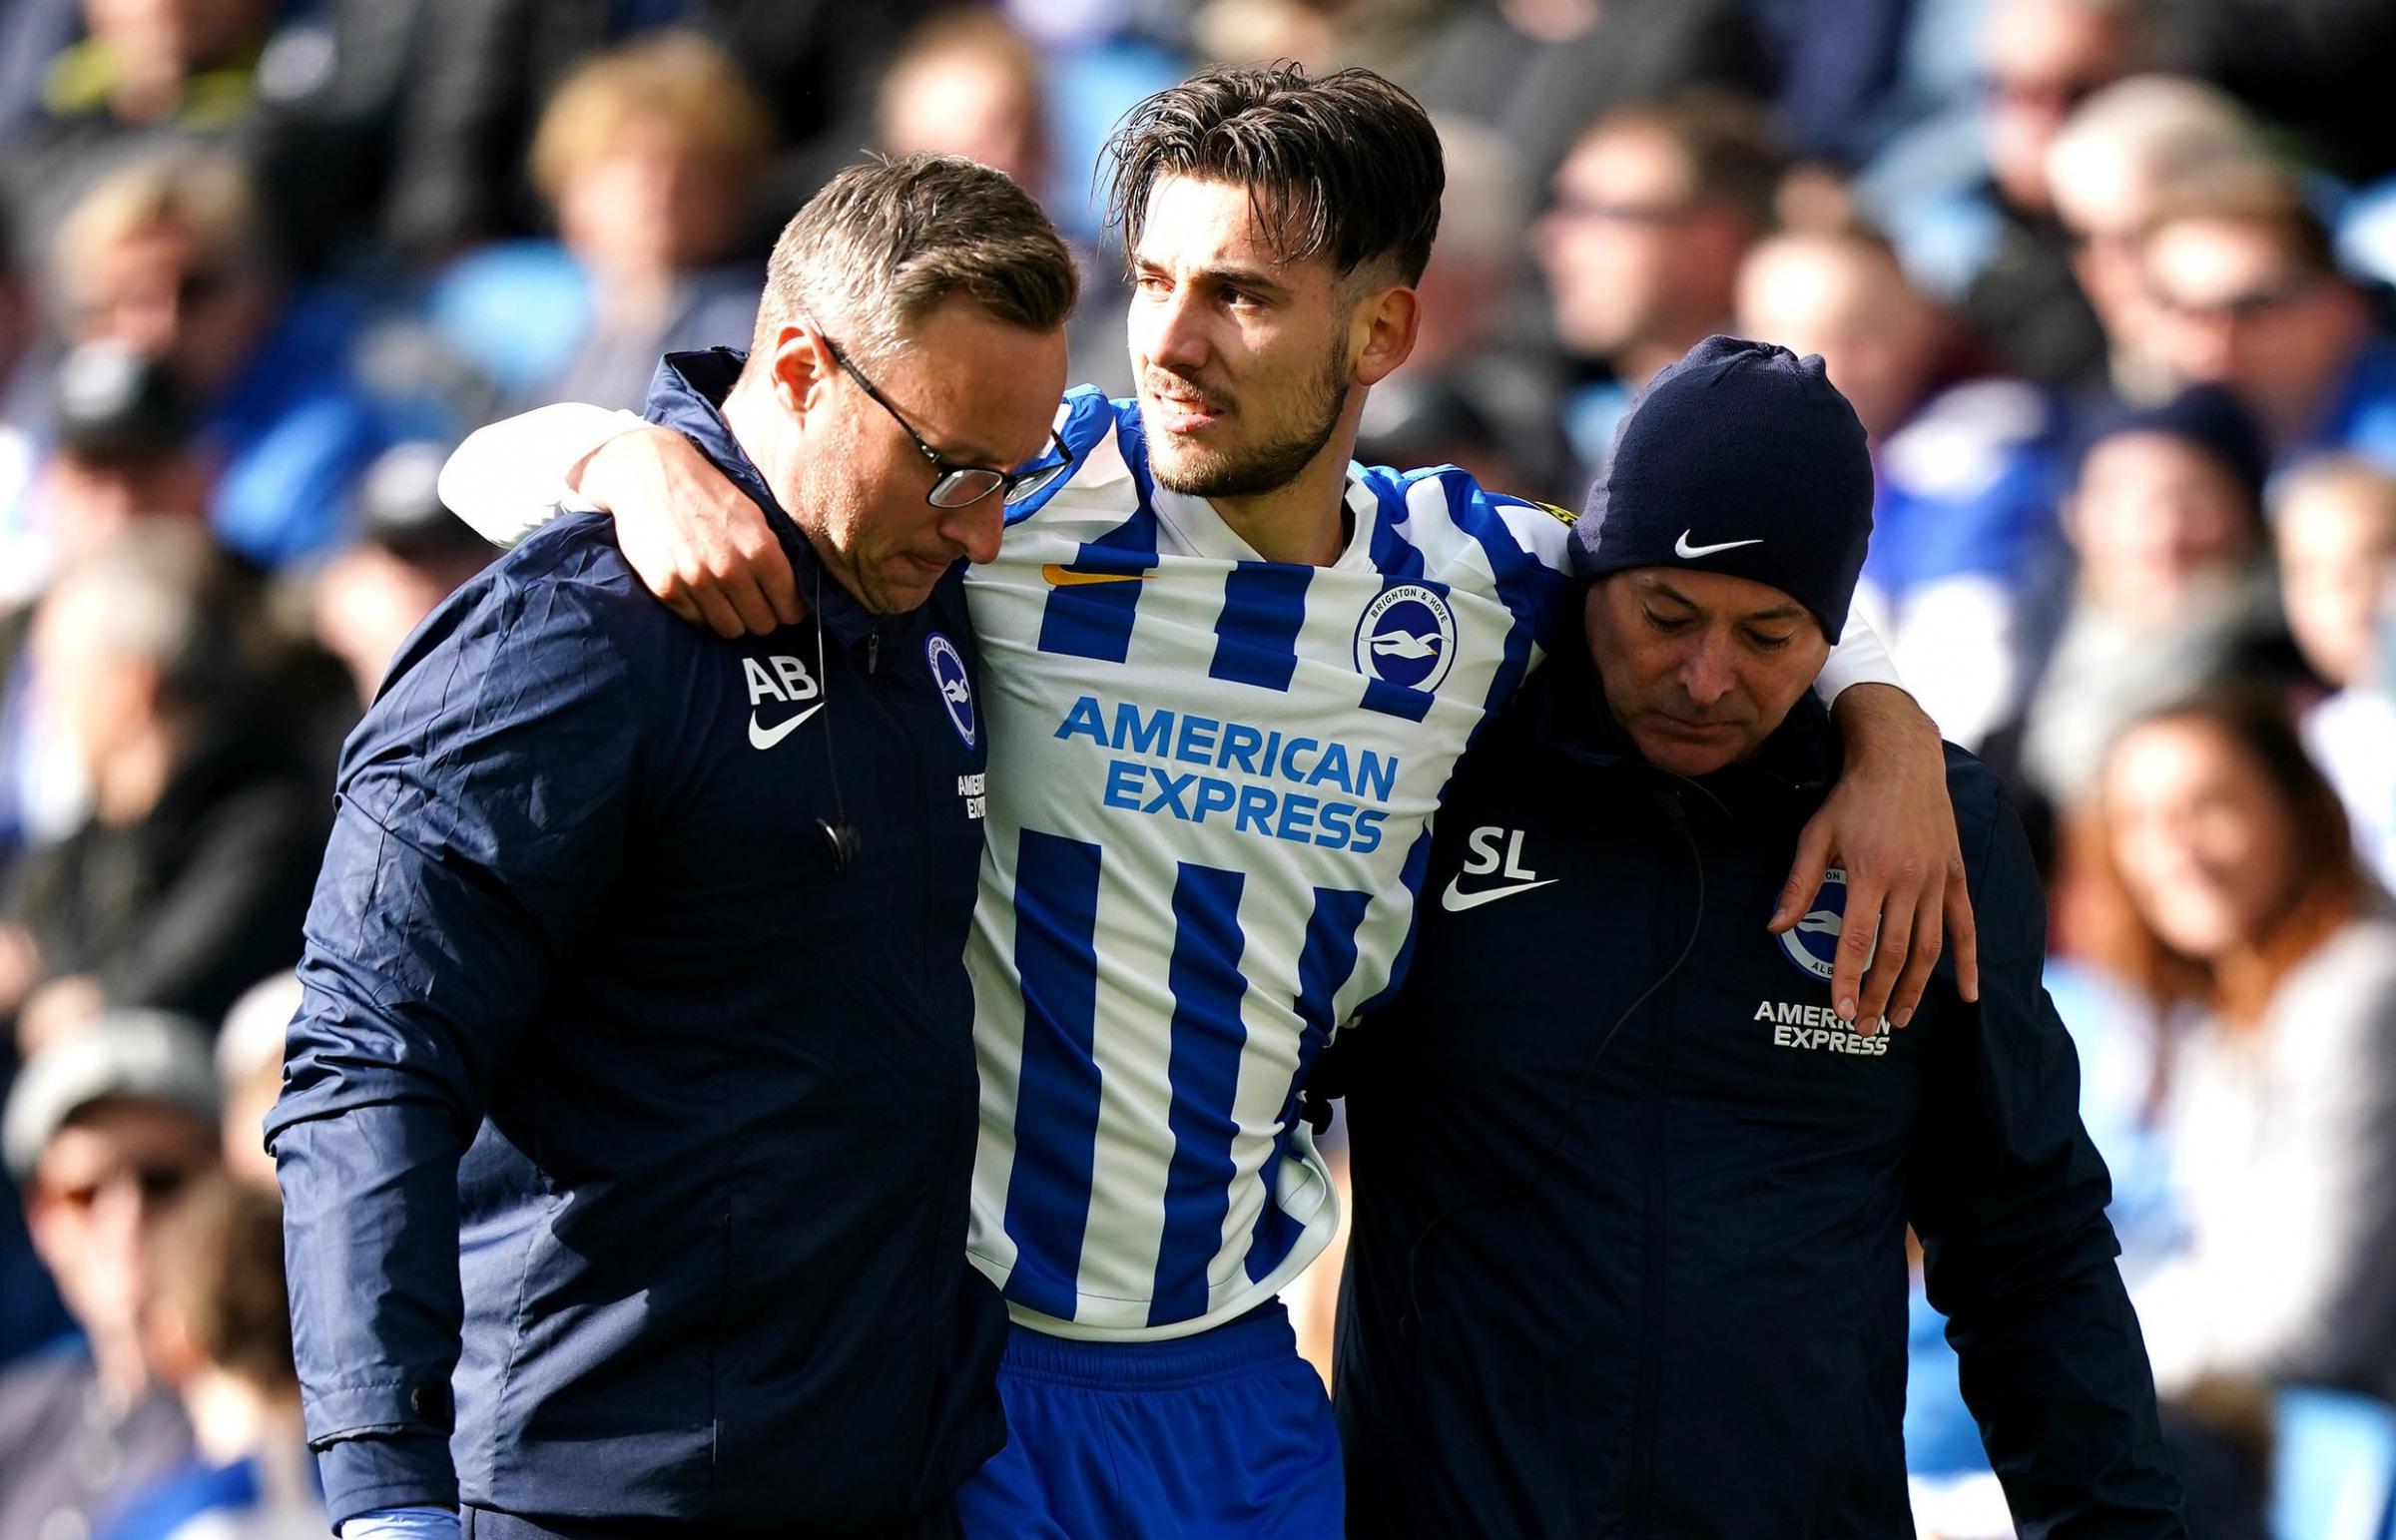 Brighton's Jakub Moder gives message of hope after injury